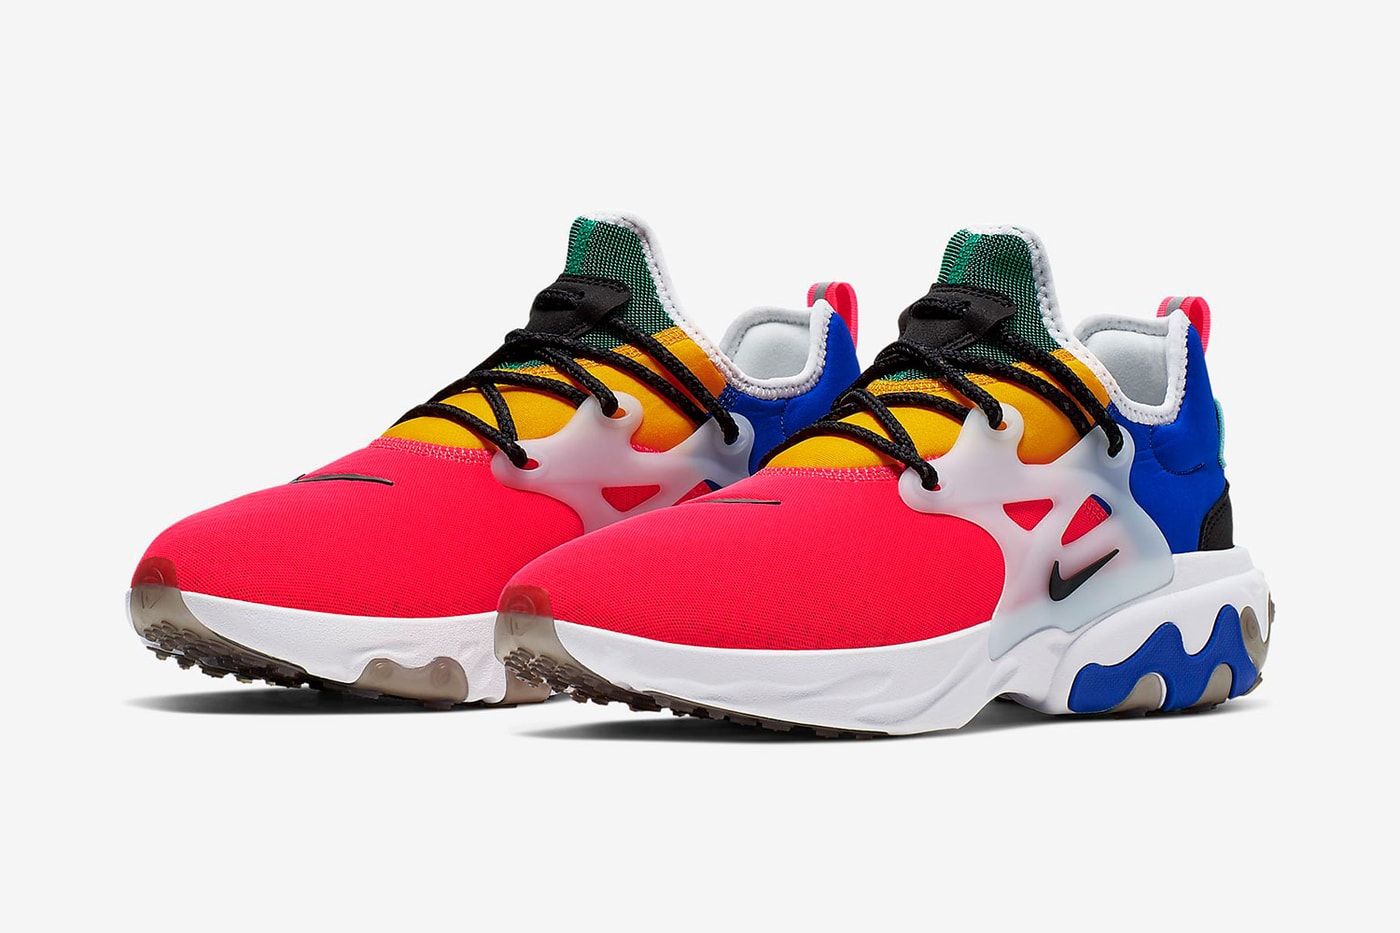 Nike React Presto Track Red Racing Blue Black CK2956-601 Shoes Sneakers Trainers Shoes kicks fashion 